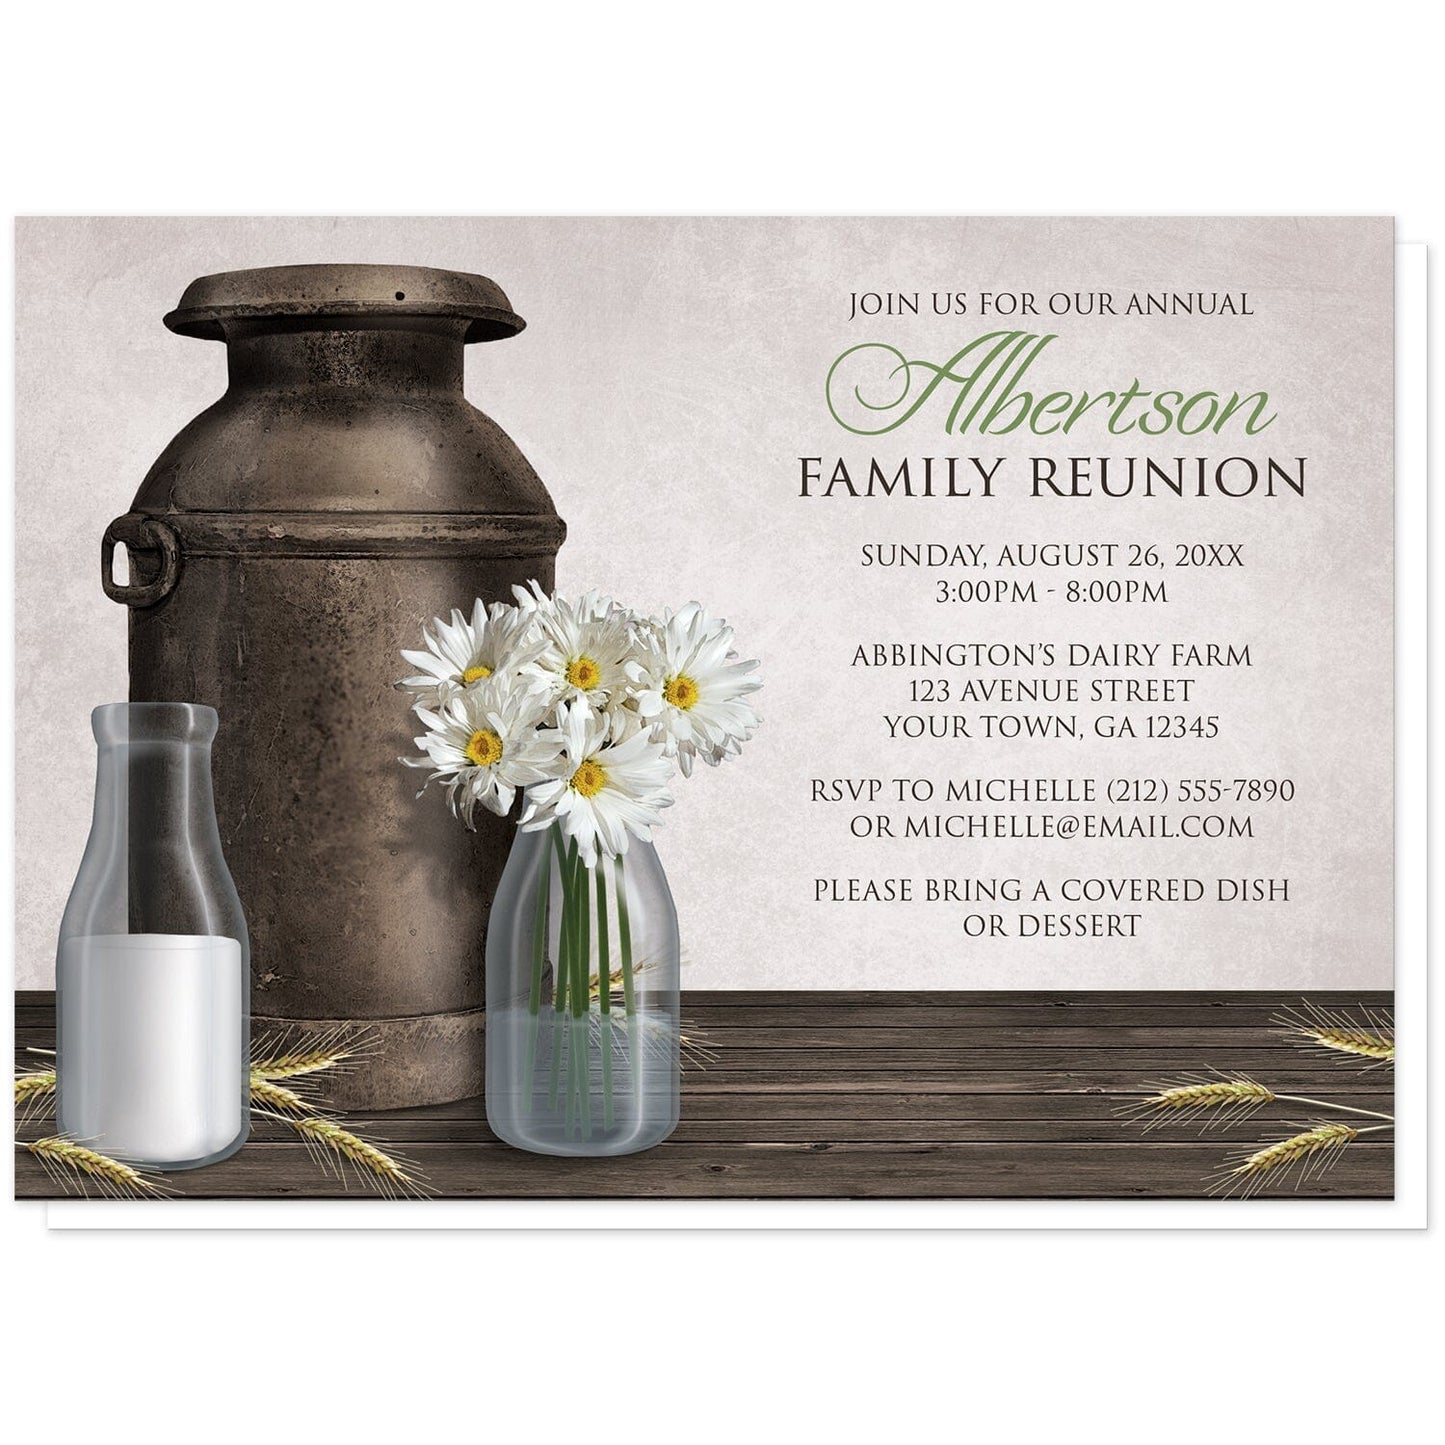 Rustic Country Dairy Farm Family Reunion Invitations at Artistically Invited. Rustic country dairy farm family reunion invitations with an illustration of an antique milk can, two milk bottles (one with milk, the other with white daisies and water) on a dark wood tabletop with hay stems. Your personalized reunion event details are custom printed in brown and green over a light parchment-colored background.